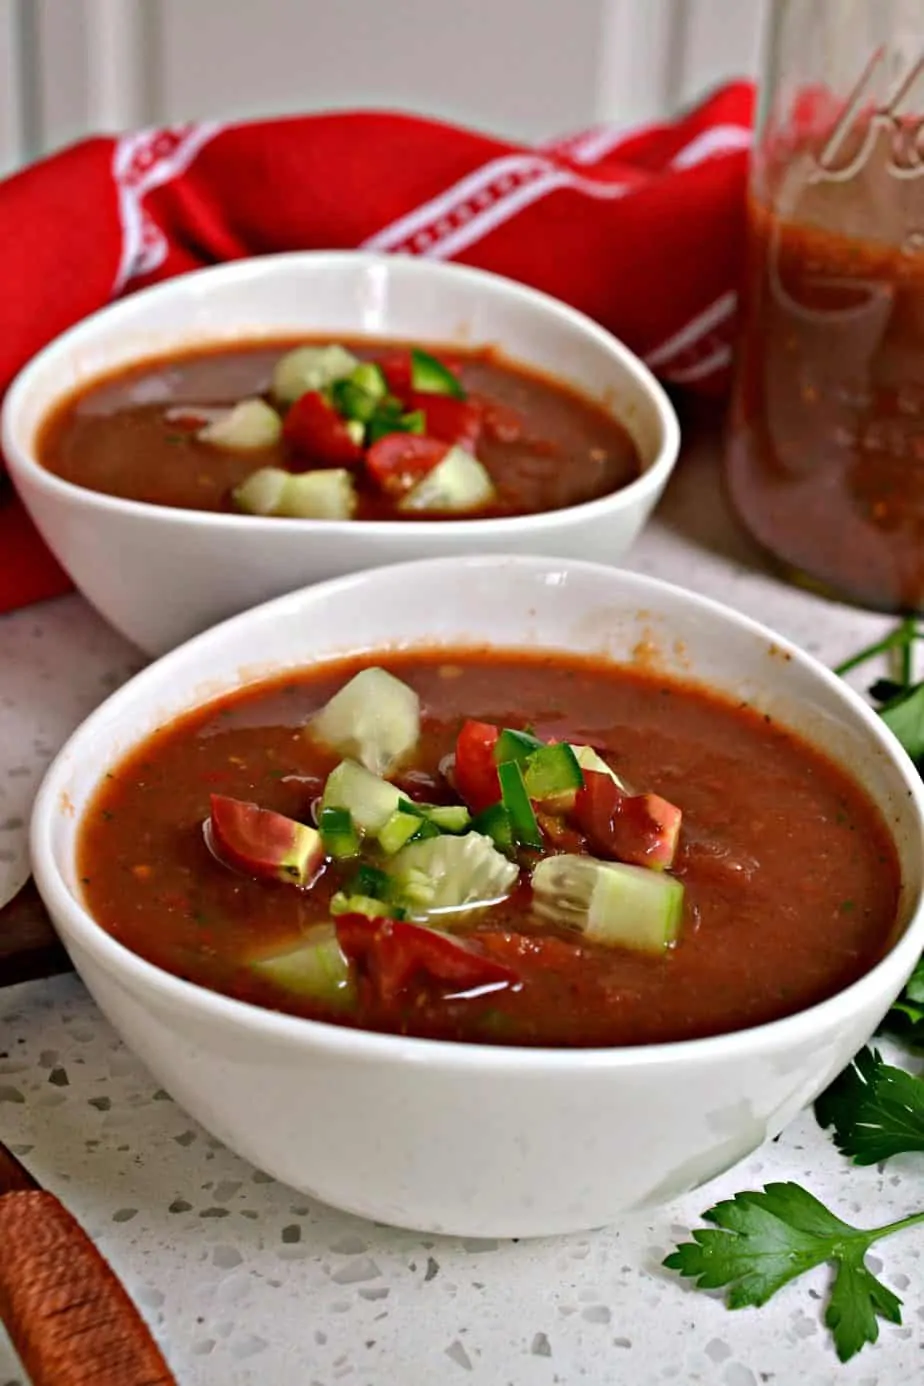 This Gazpacho Recipe with sun-ripened tomatoes, cucumbers, onions, and red bell pepper is made easy in a food processor. 